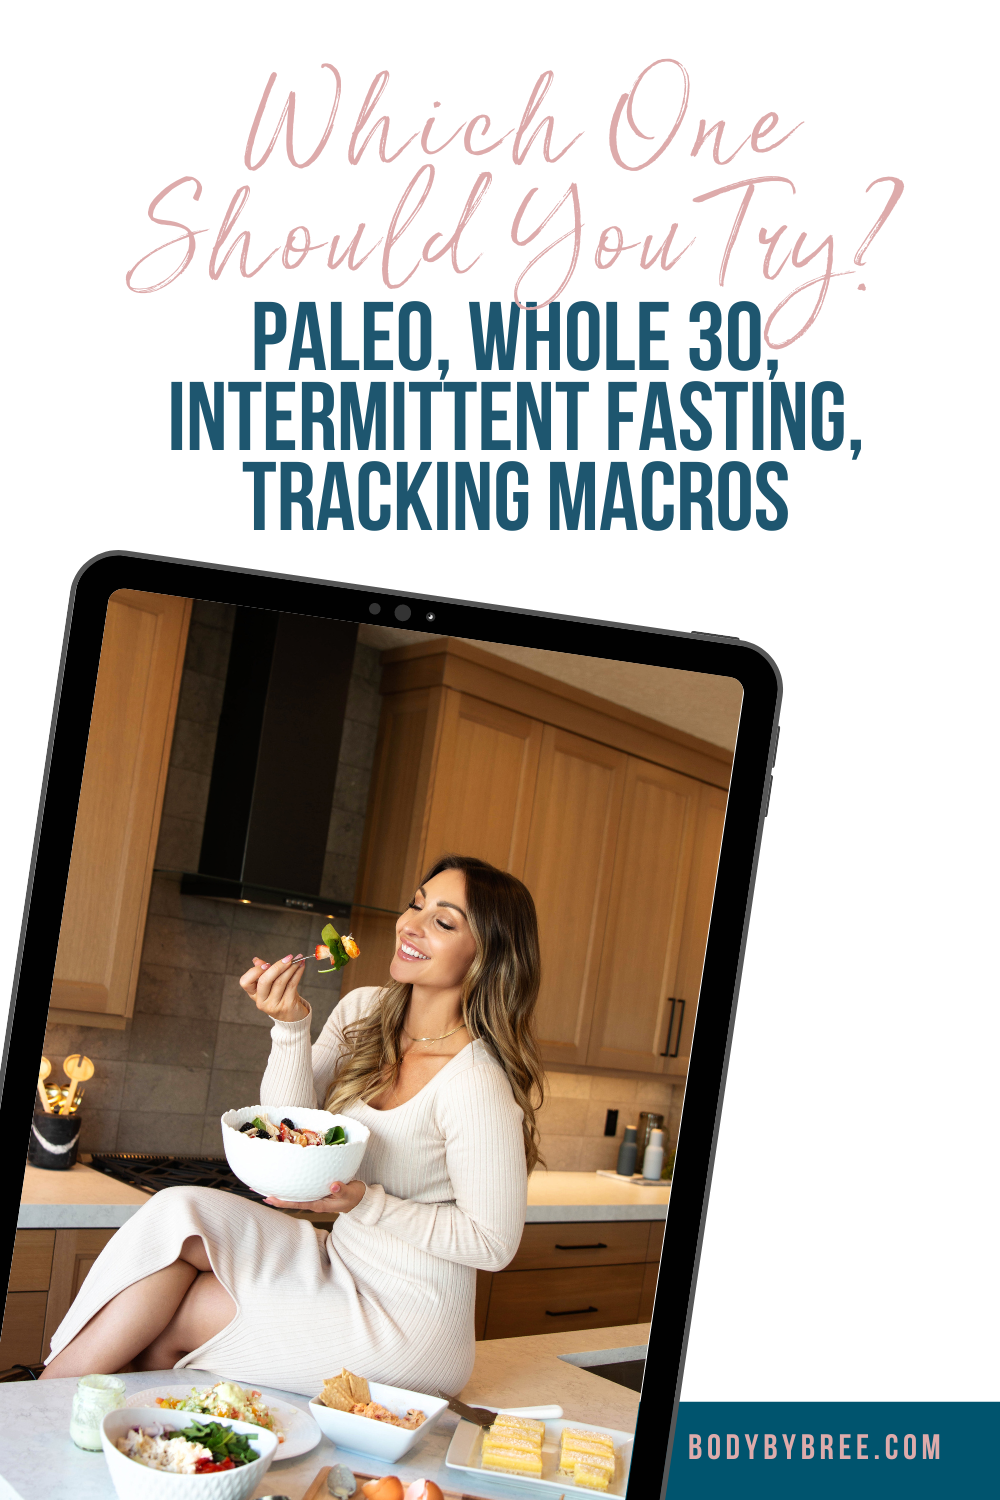 PALEO, WHOLE 30, INTERMITTENT FASTING, TRACKING MACROS: Which one you should try